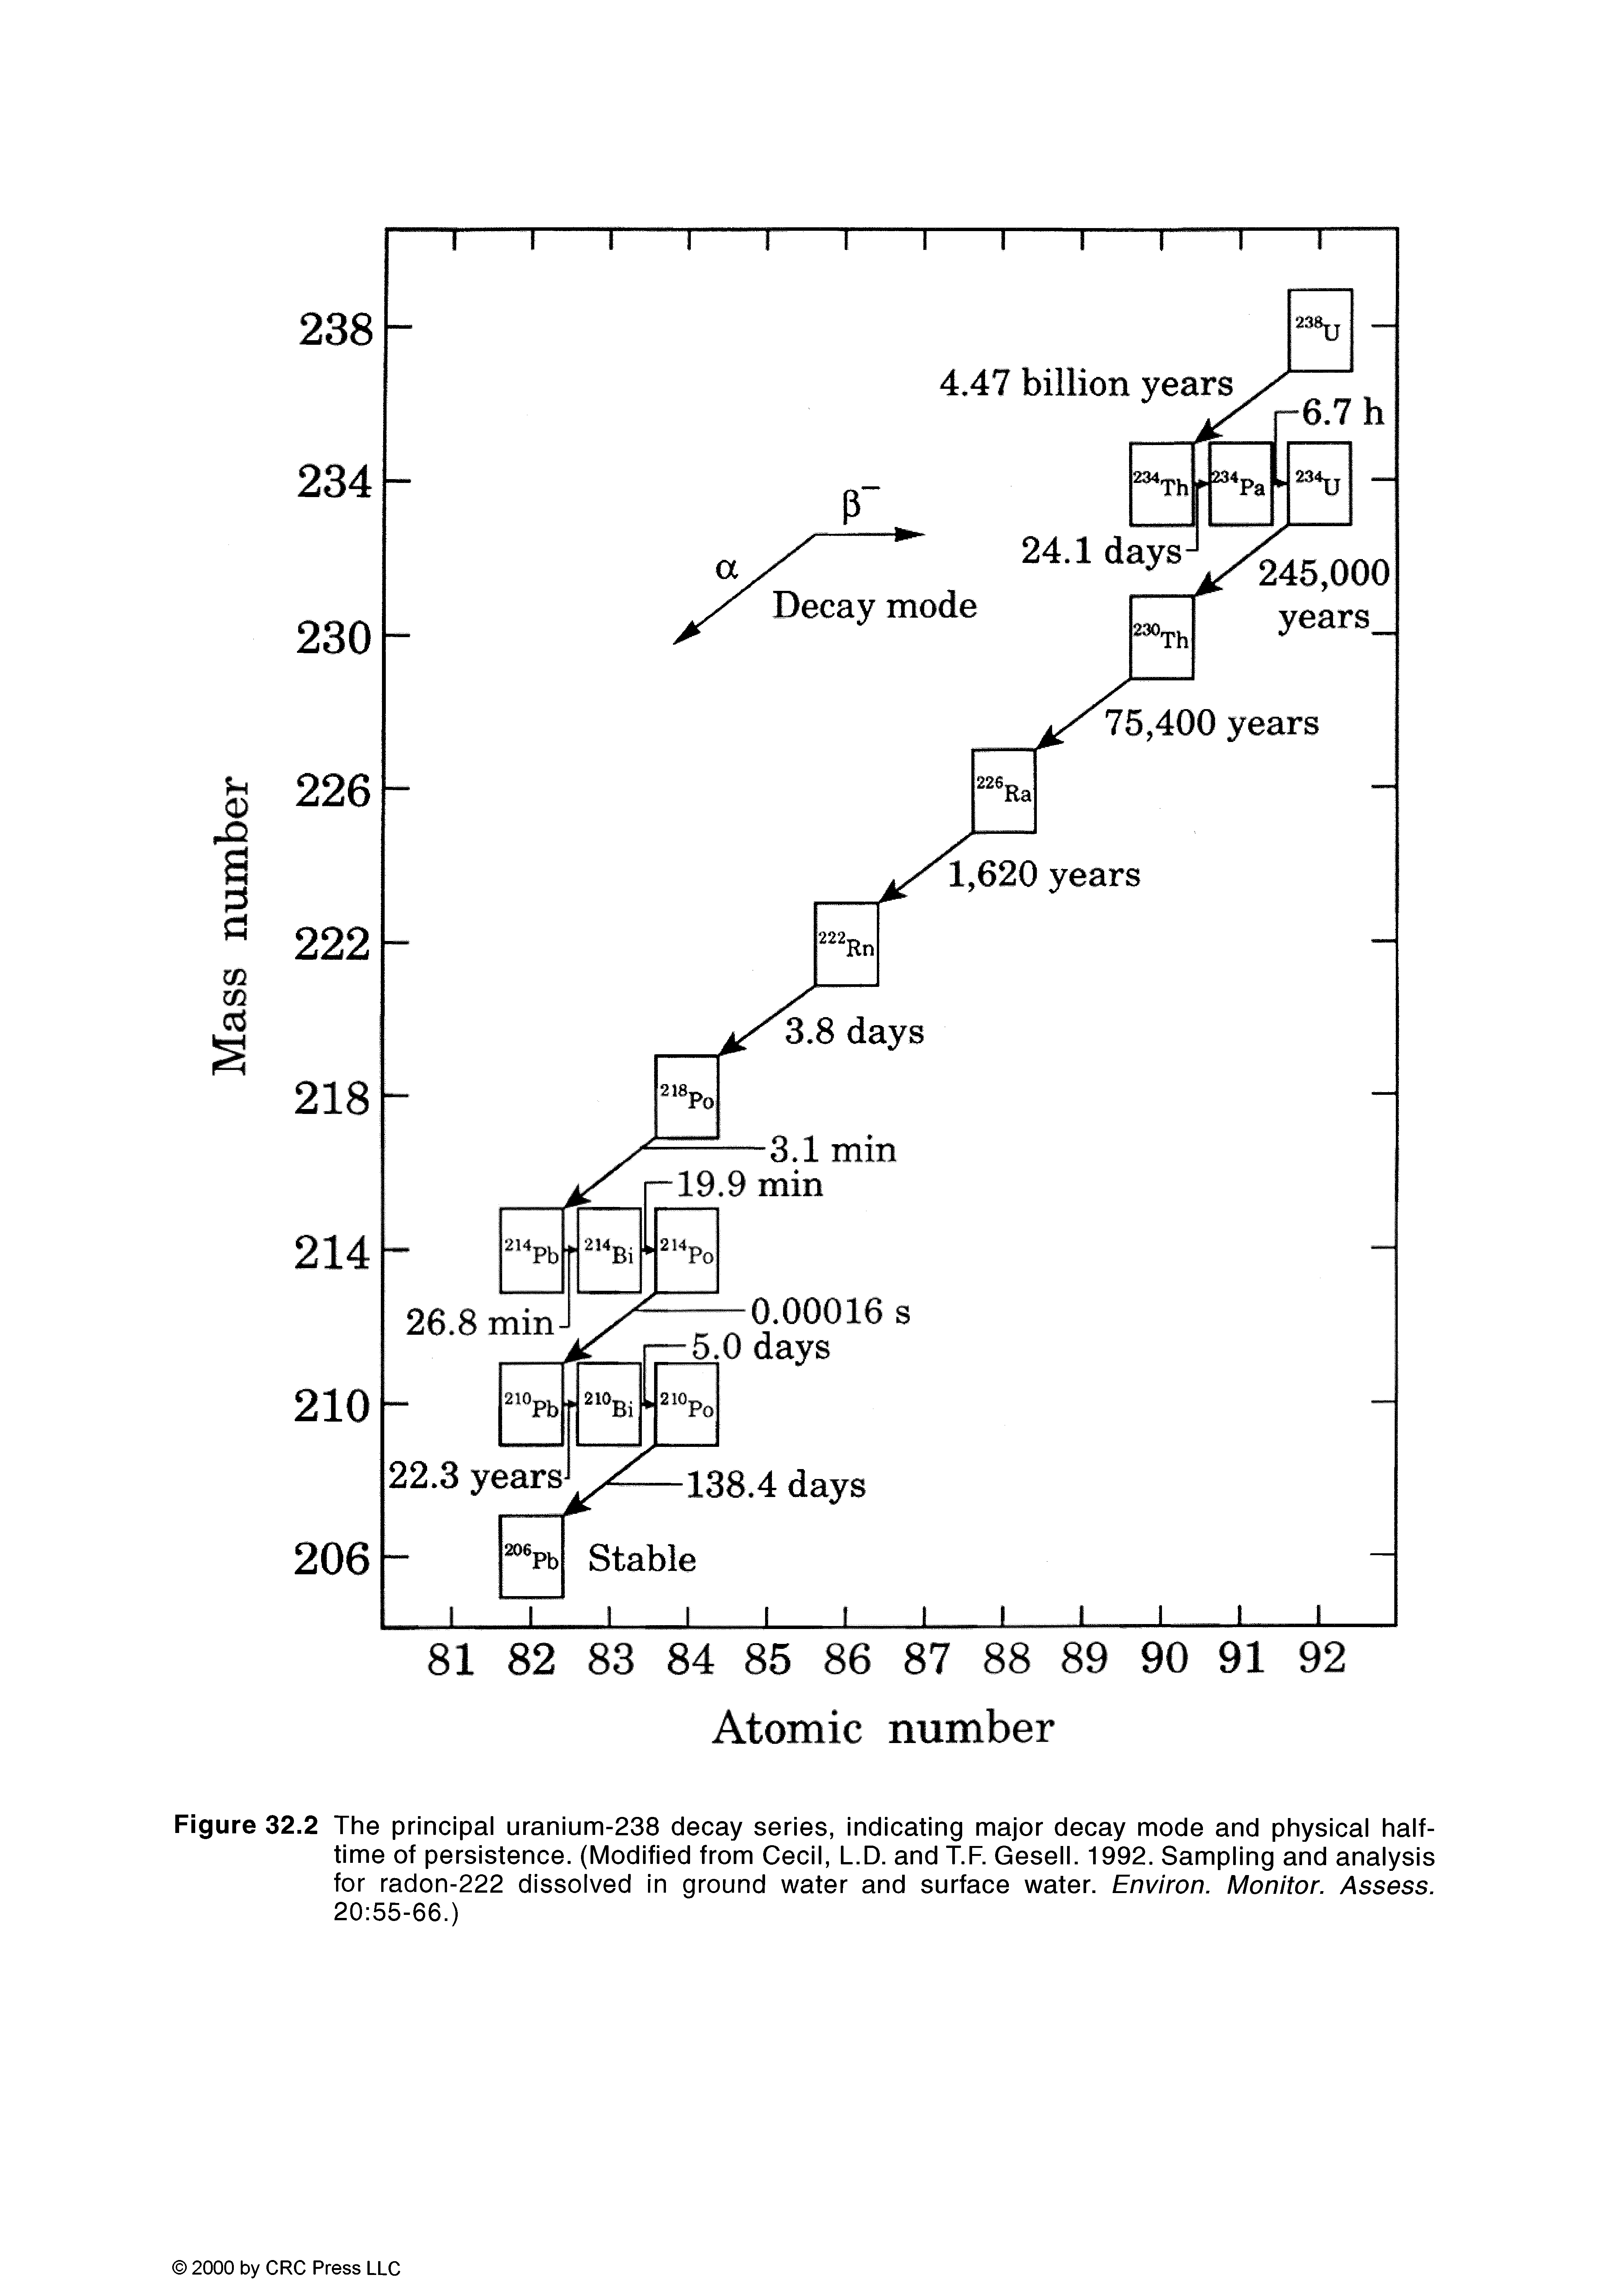 Figure 32.2 The principal uranium-238 decay series, indicating major decay mode and physical halftime of persistence. (Modified from Cecil, L.D. and T.F. Gesell. 1992. Sampling and analysis for radon-222 dissolved in ground water and surface water. Environ. Monitor. Assess. 20 55-66.)...